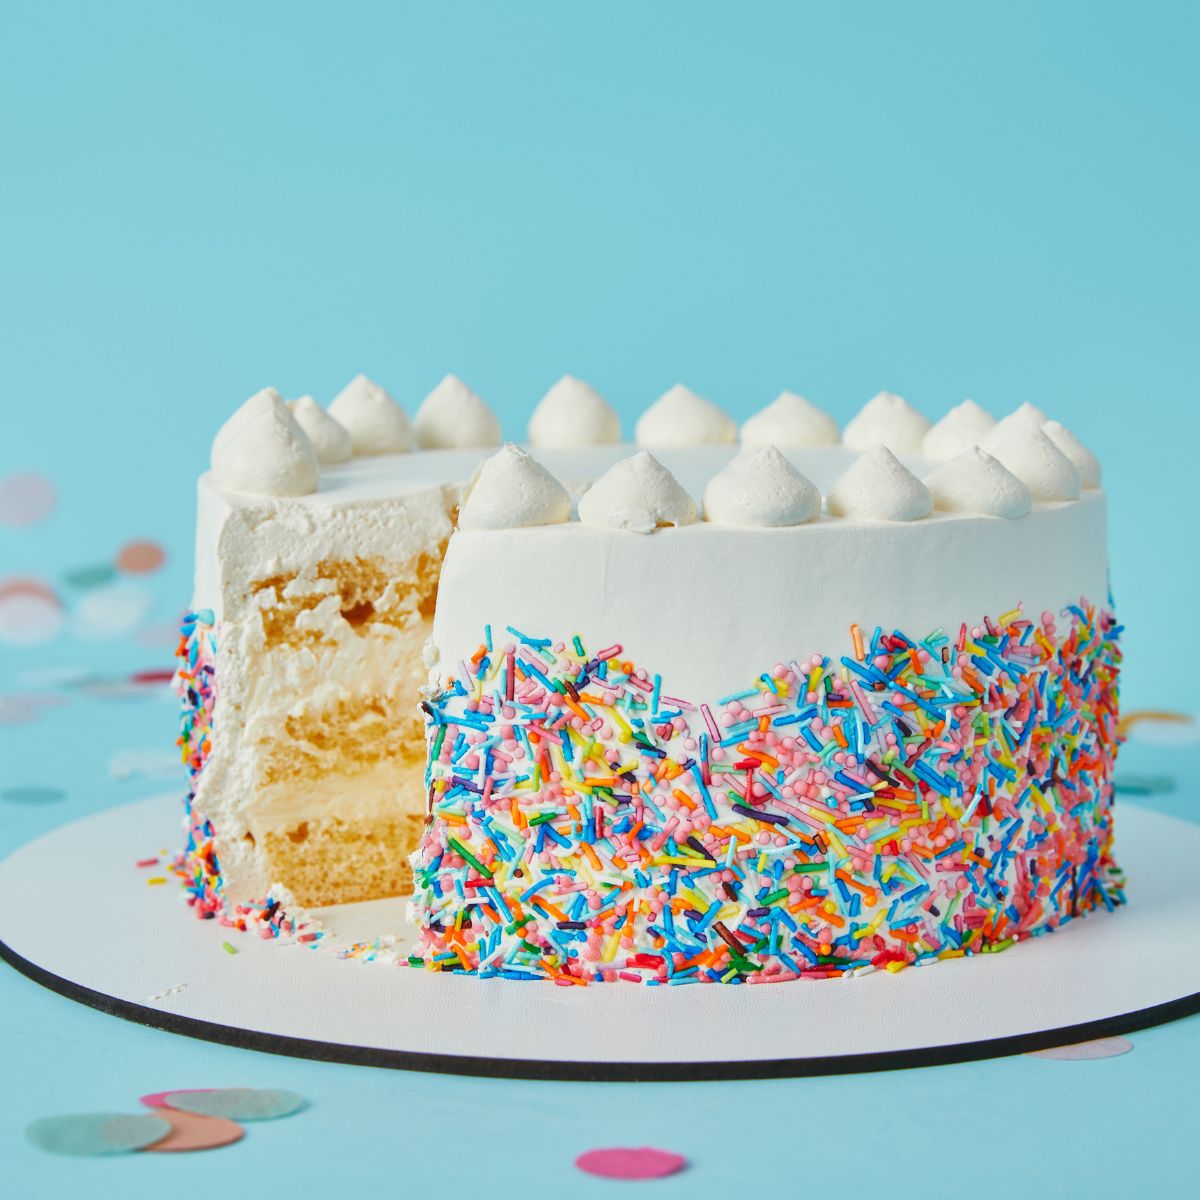 A white vanilla cake decorated with colorful sprinkles and some white frosting on top is placed in a white disk on a light blue surface. 